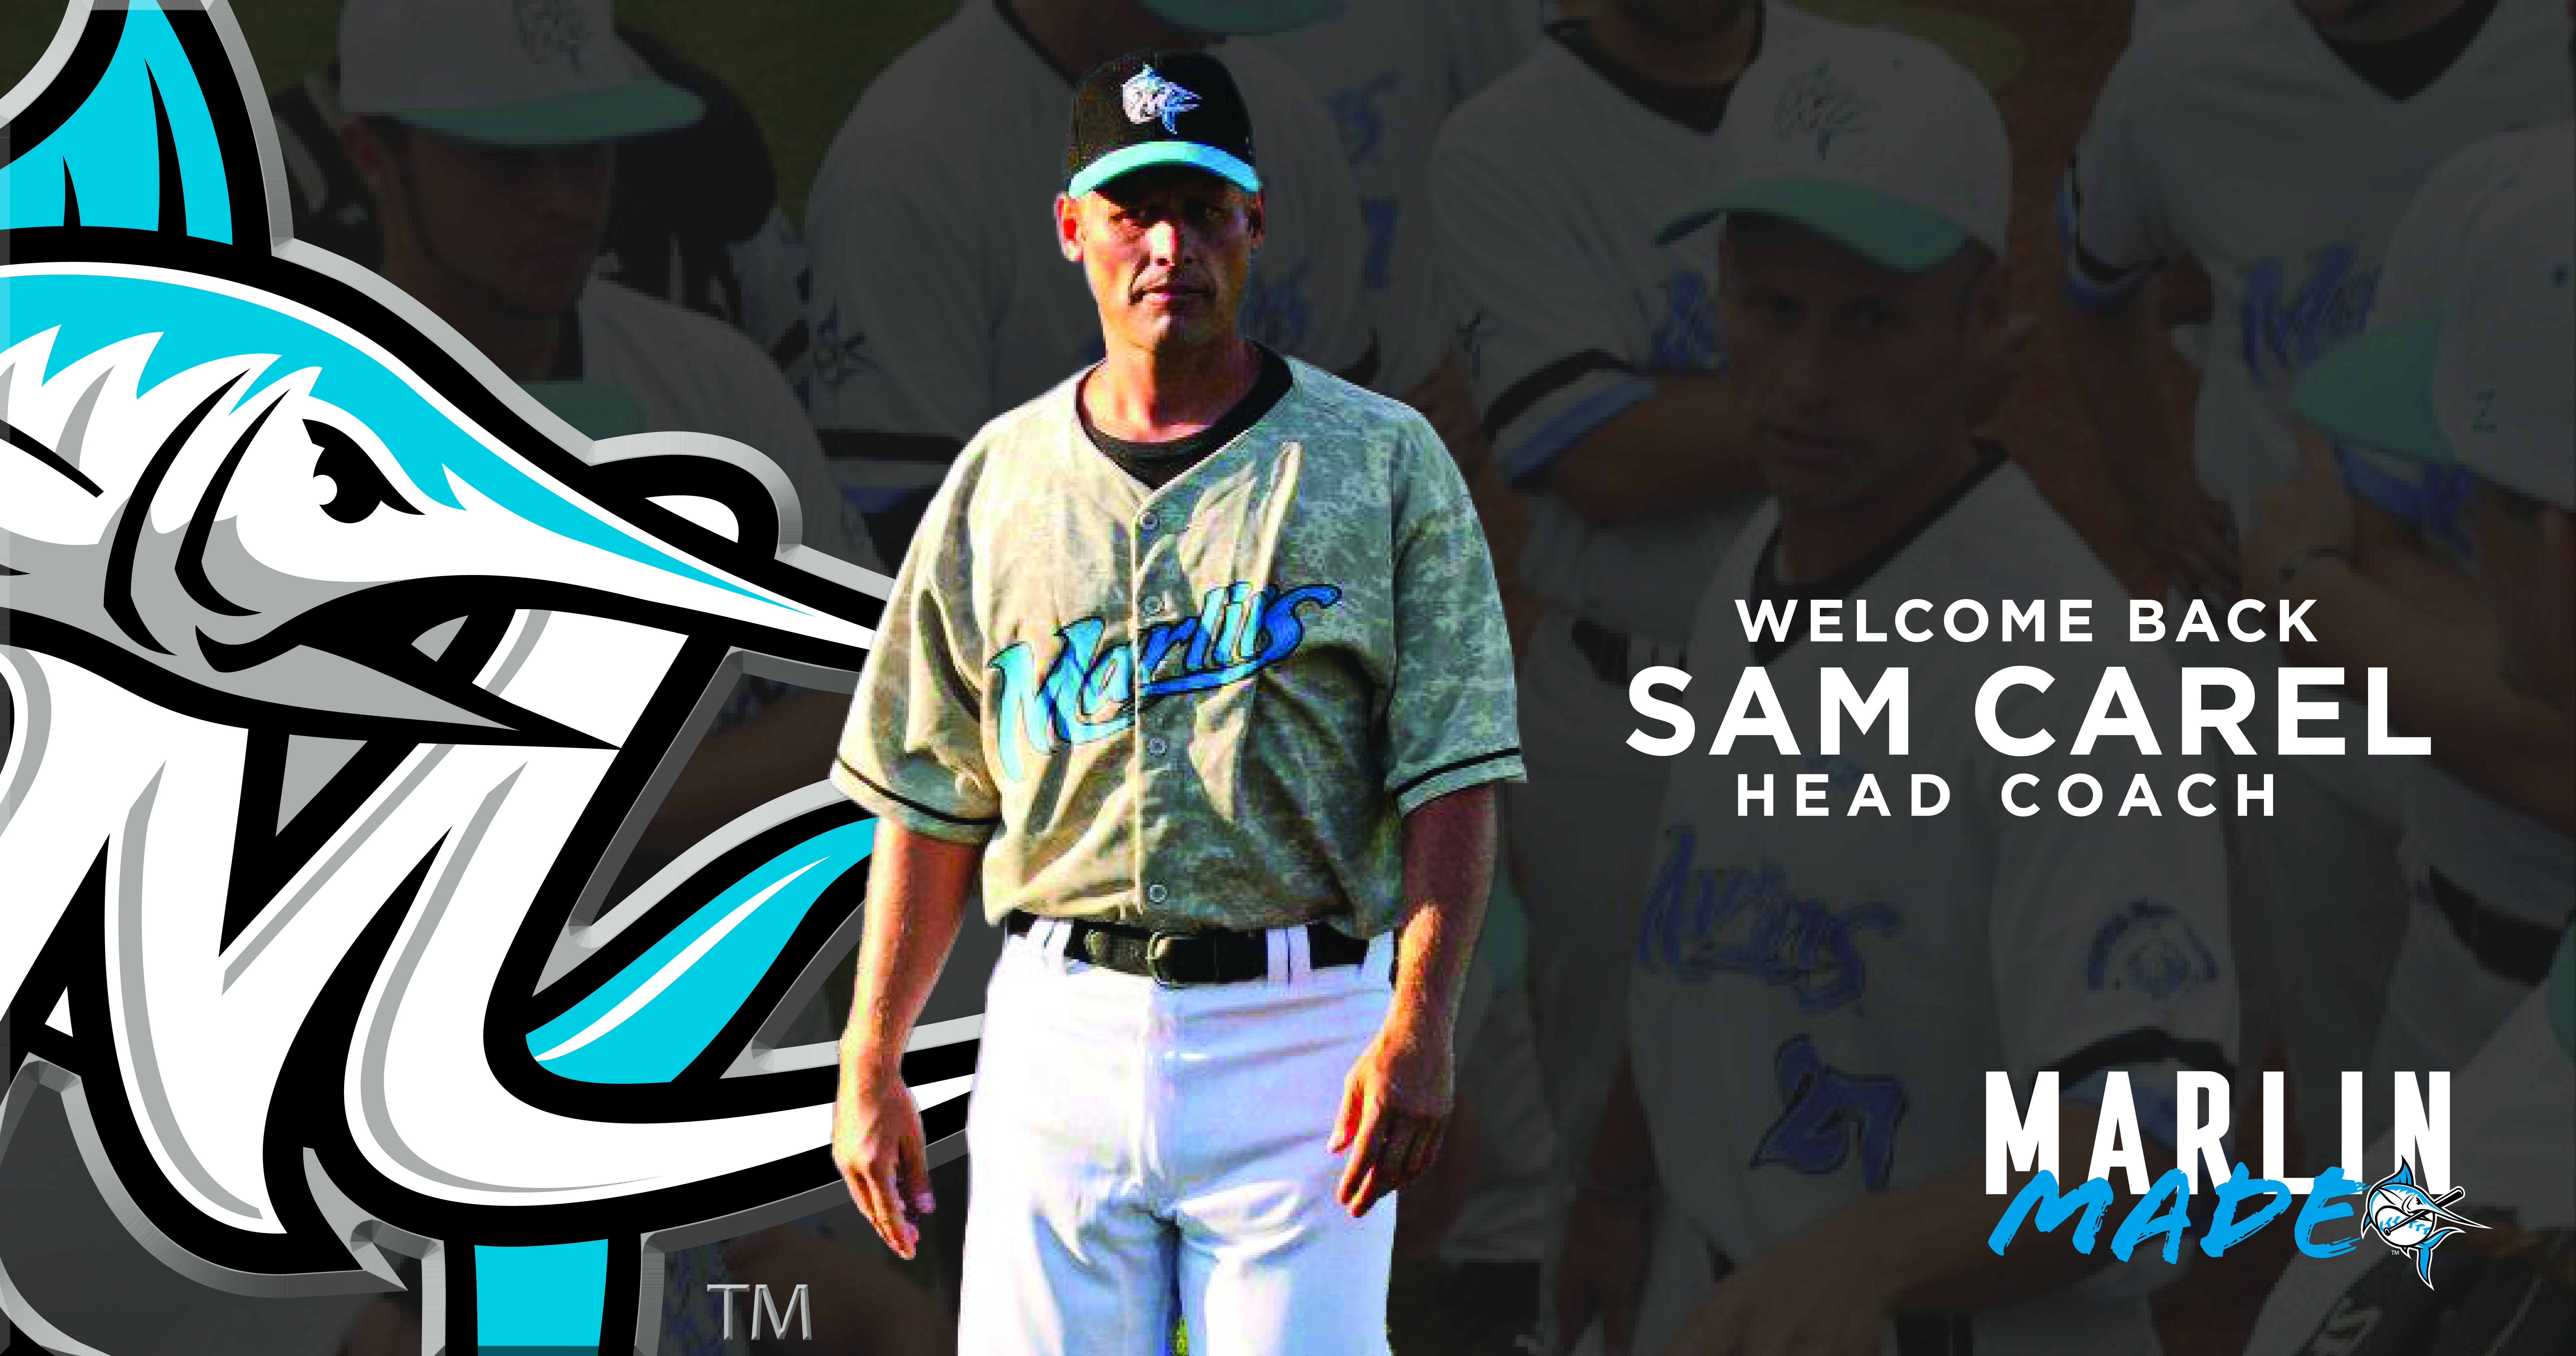 Sam Carel returns to lead the Marlins on the field in 2022